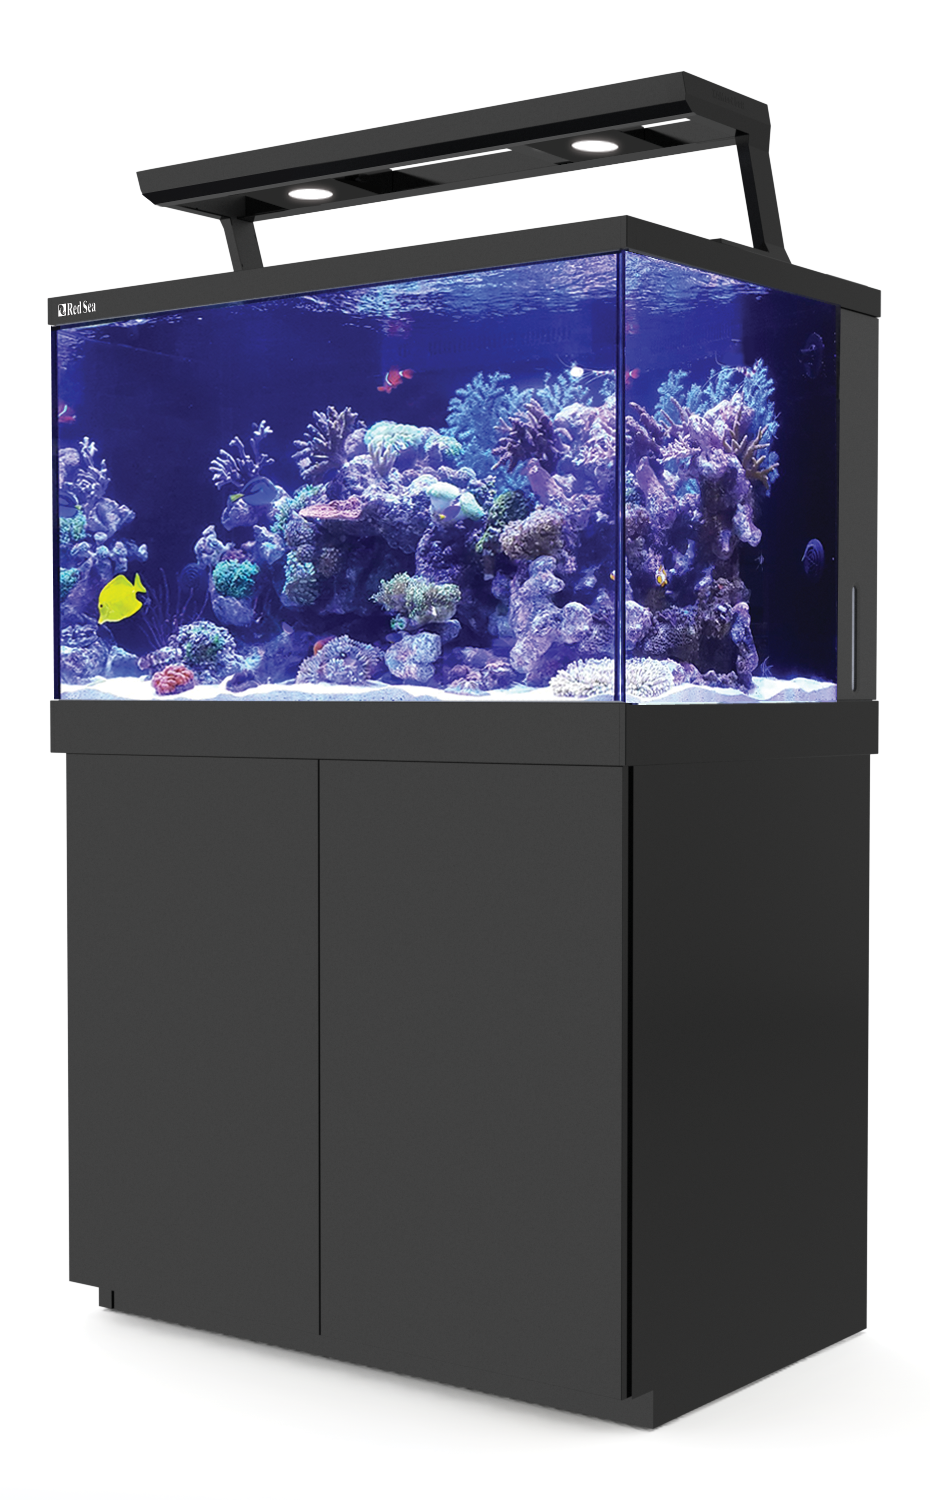 Red Sea MAX S-400 - Complete All-in-One LED Reef Aquarium 110 Gallons